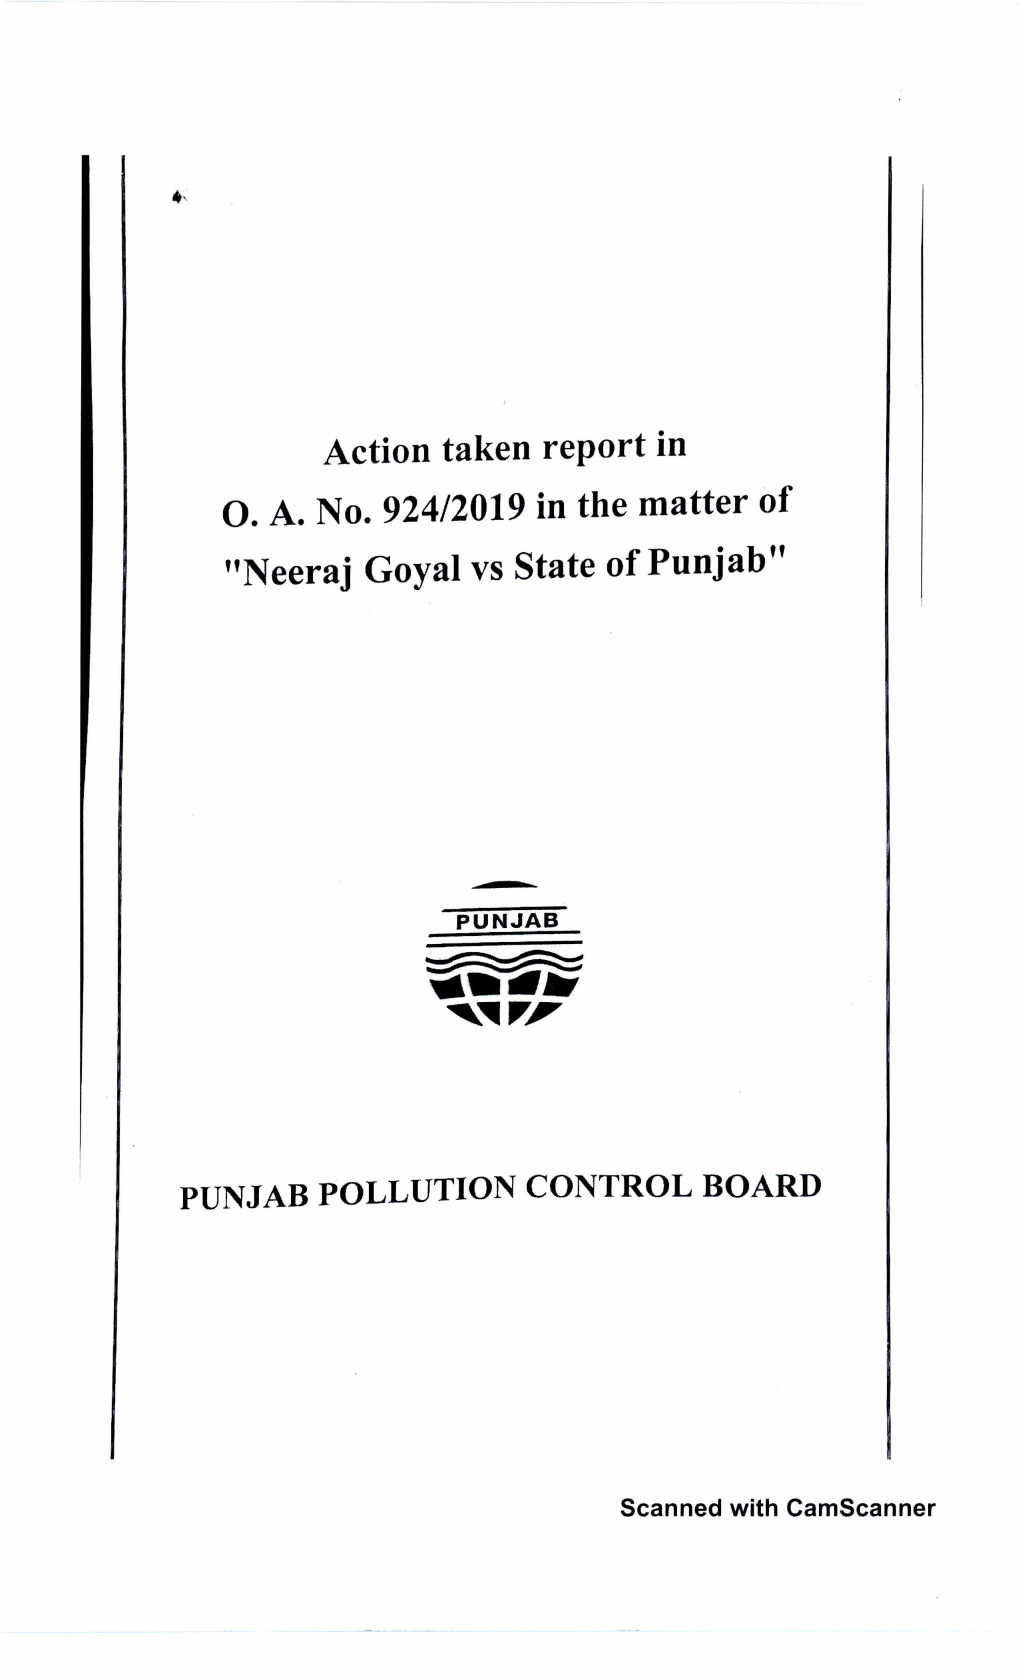 Action Taken Report in OA No. 924 of 2019.Pdf